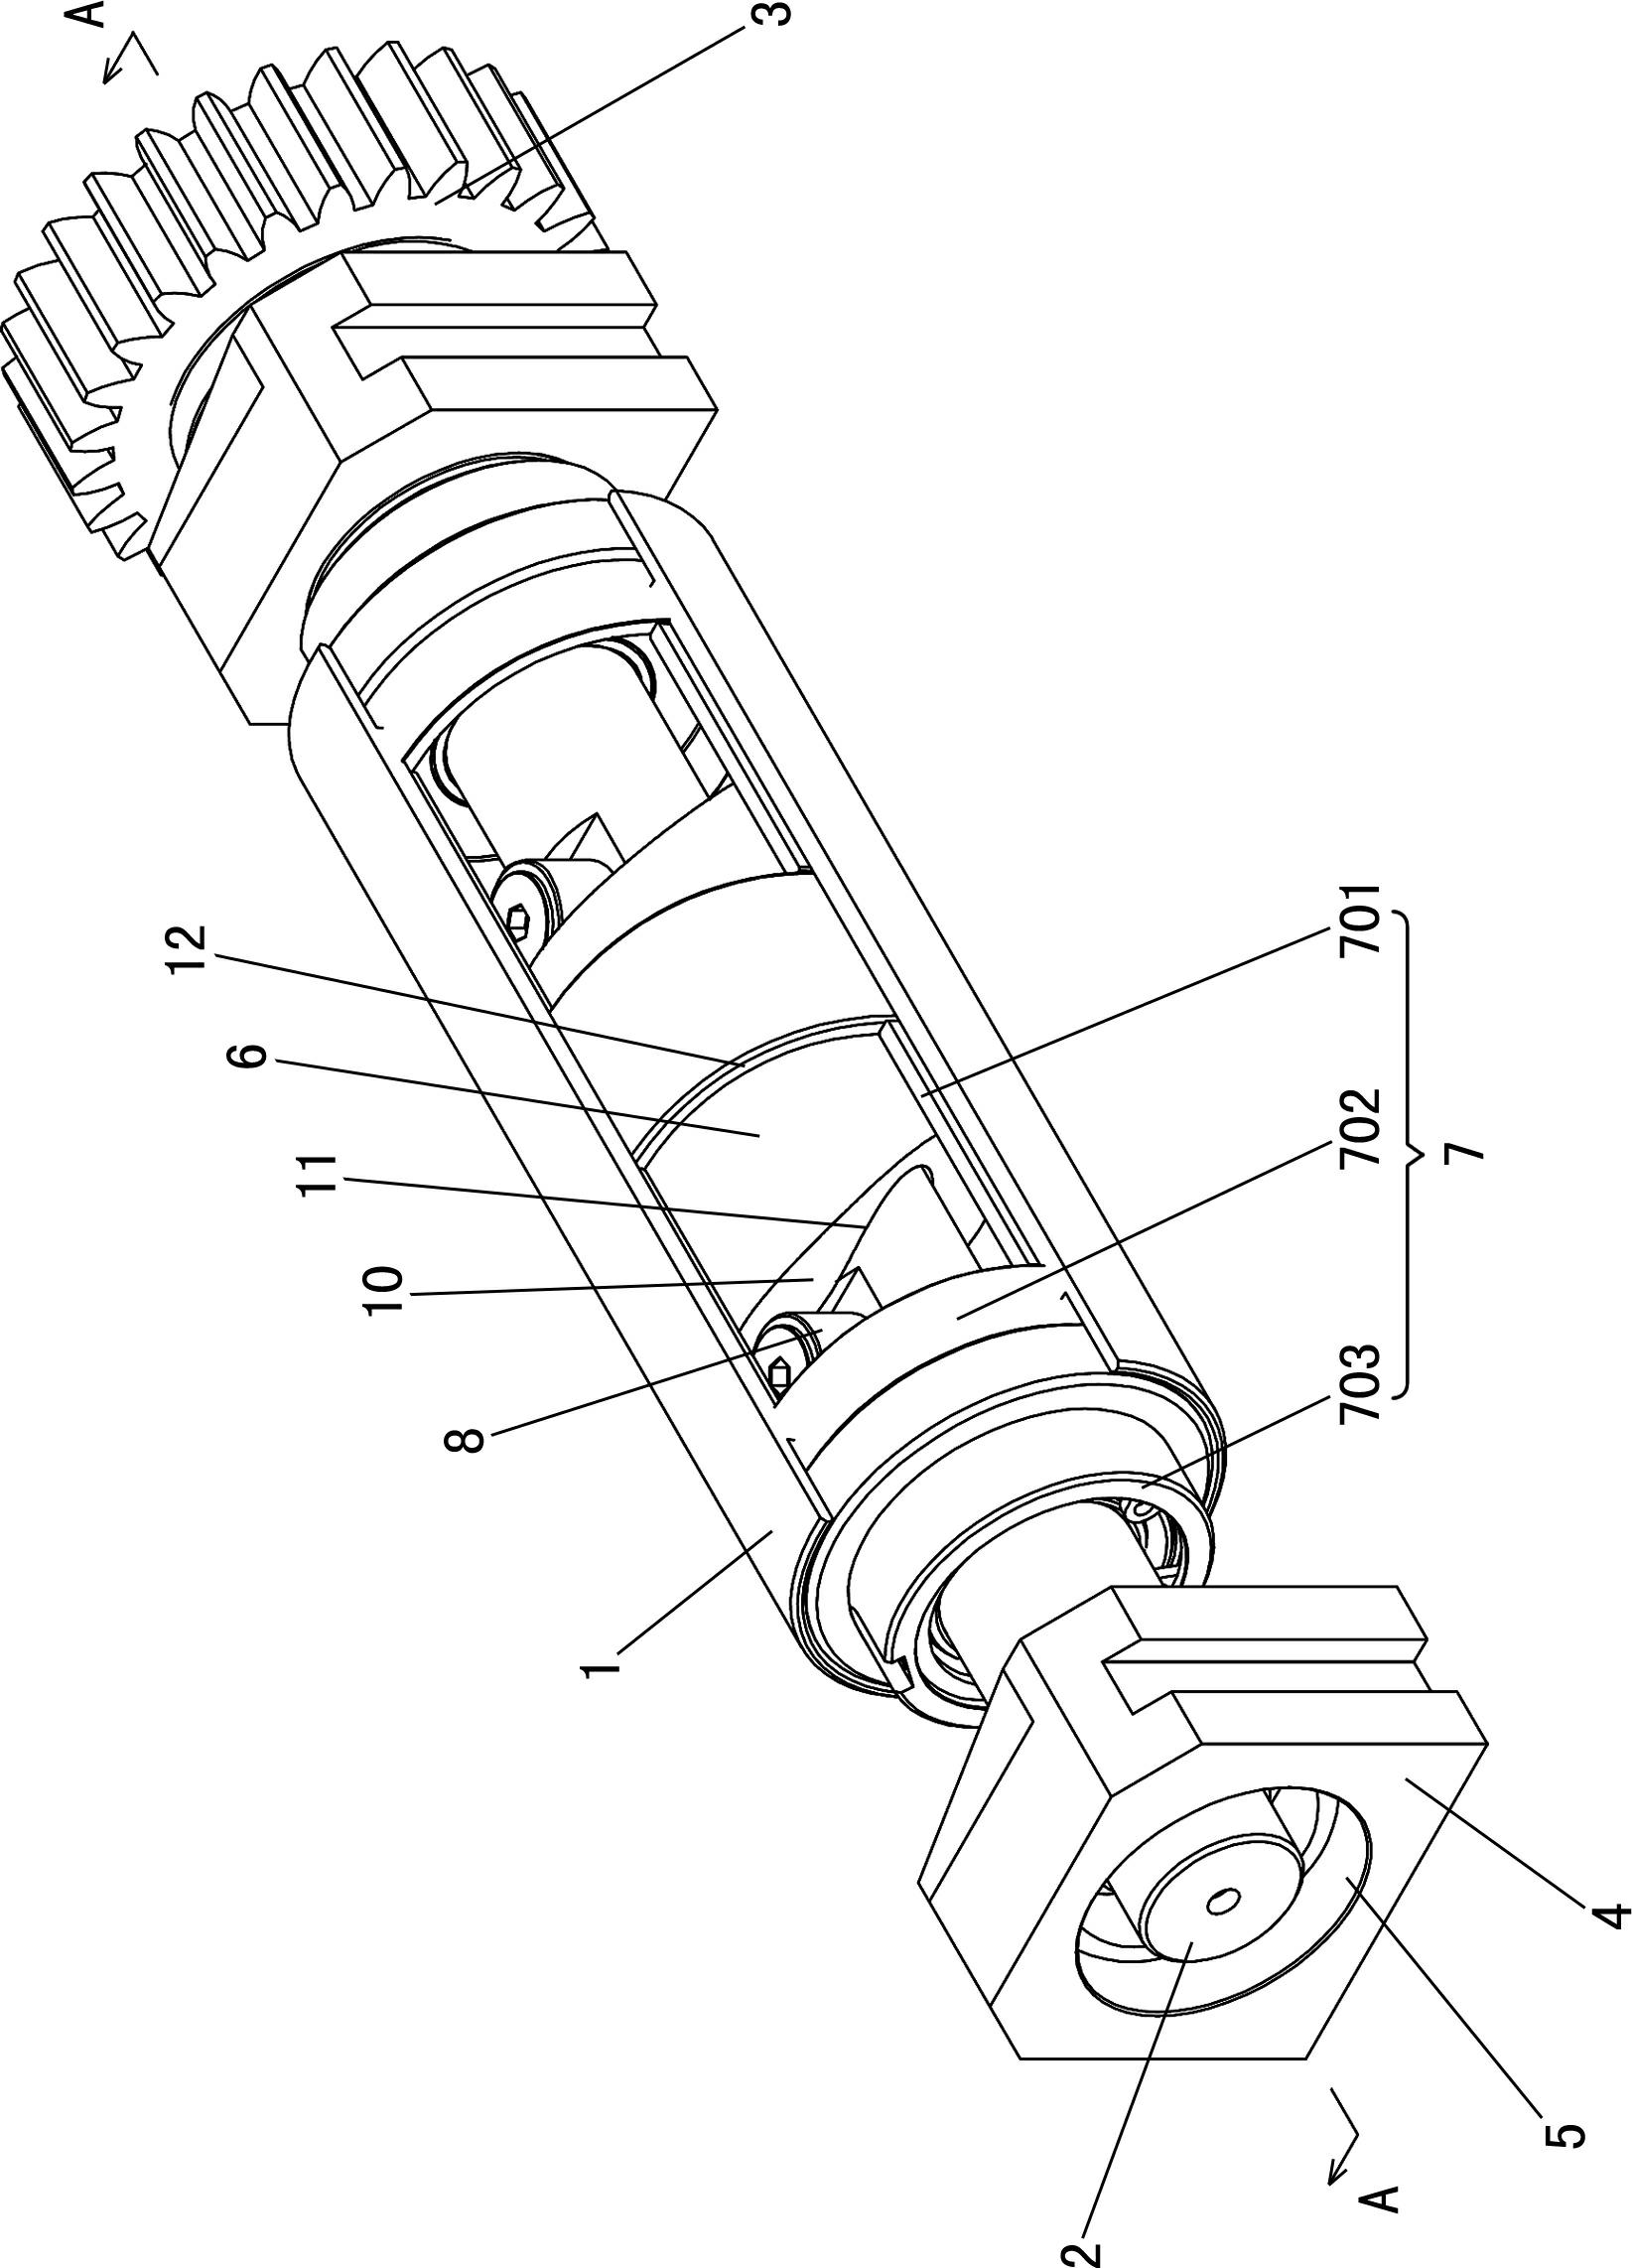 Ink oscillating device for offset machine